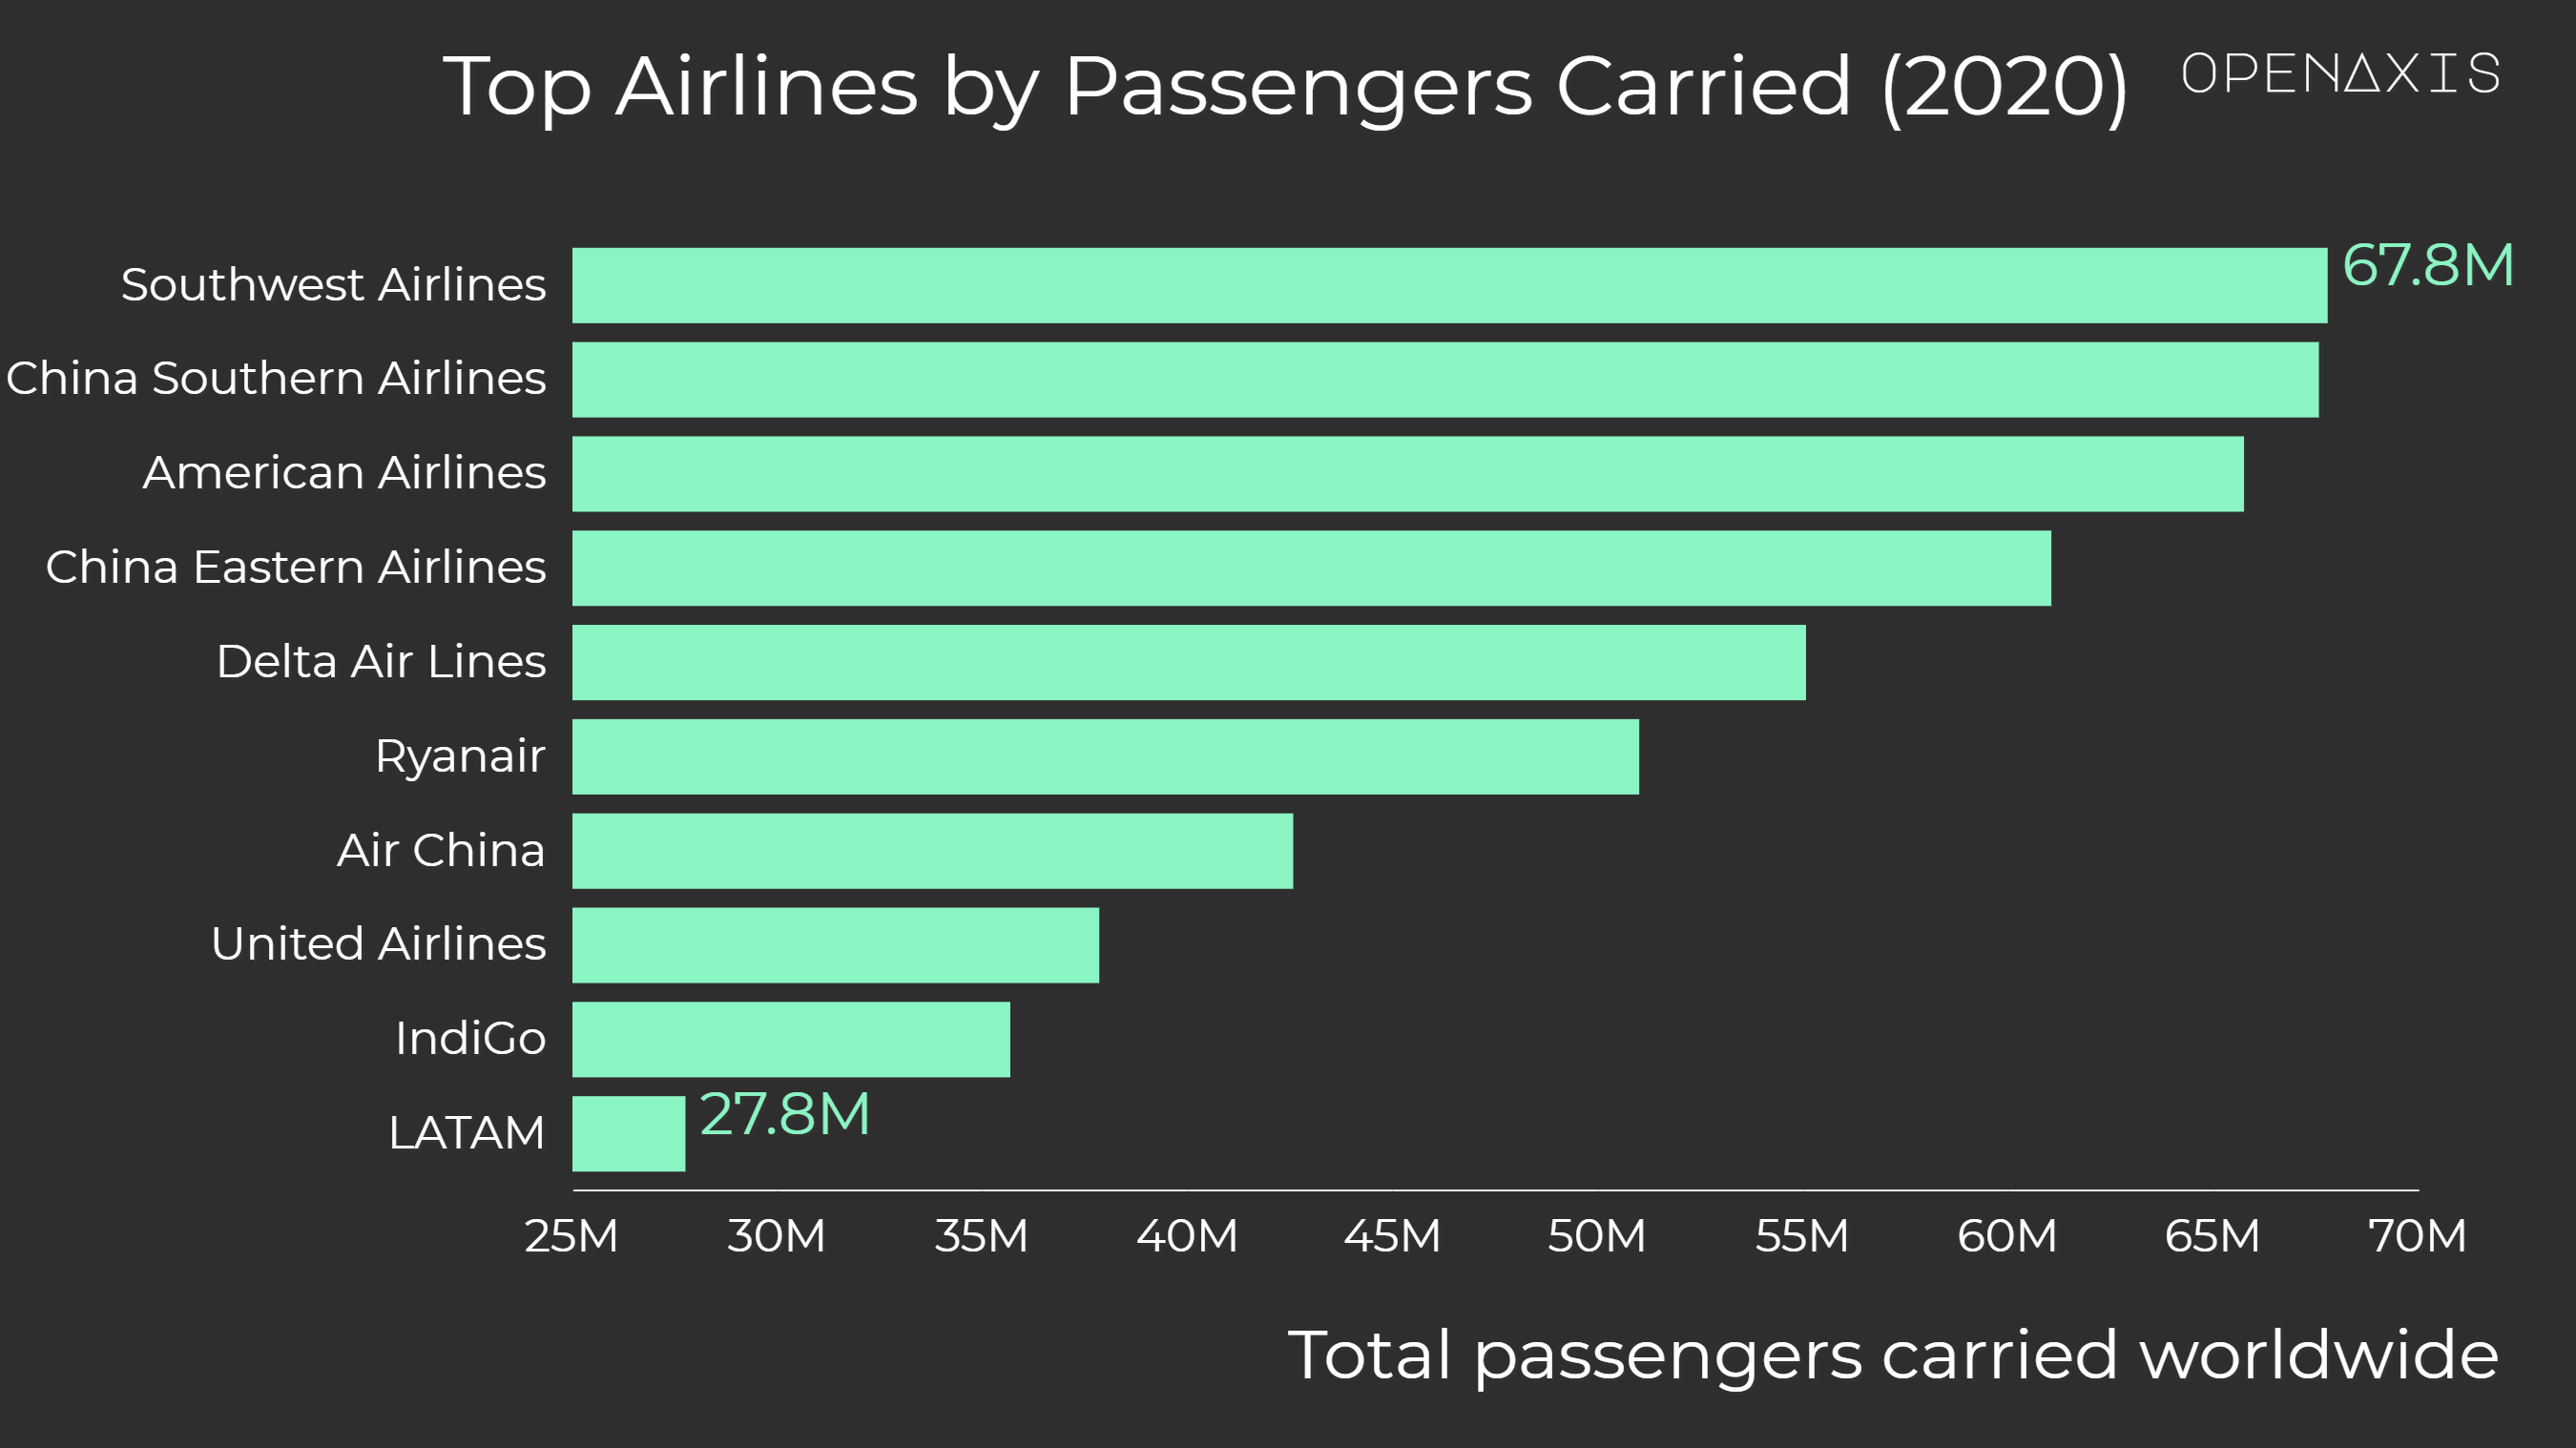 "Top Airlines by Passengers Carried (2020)"